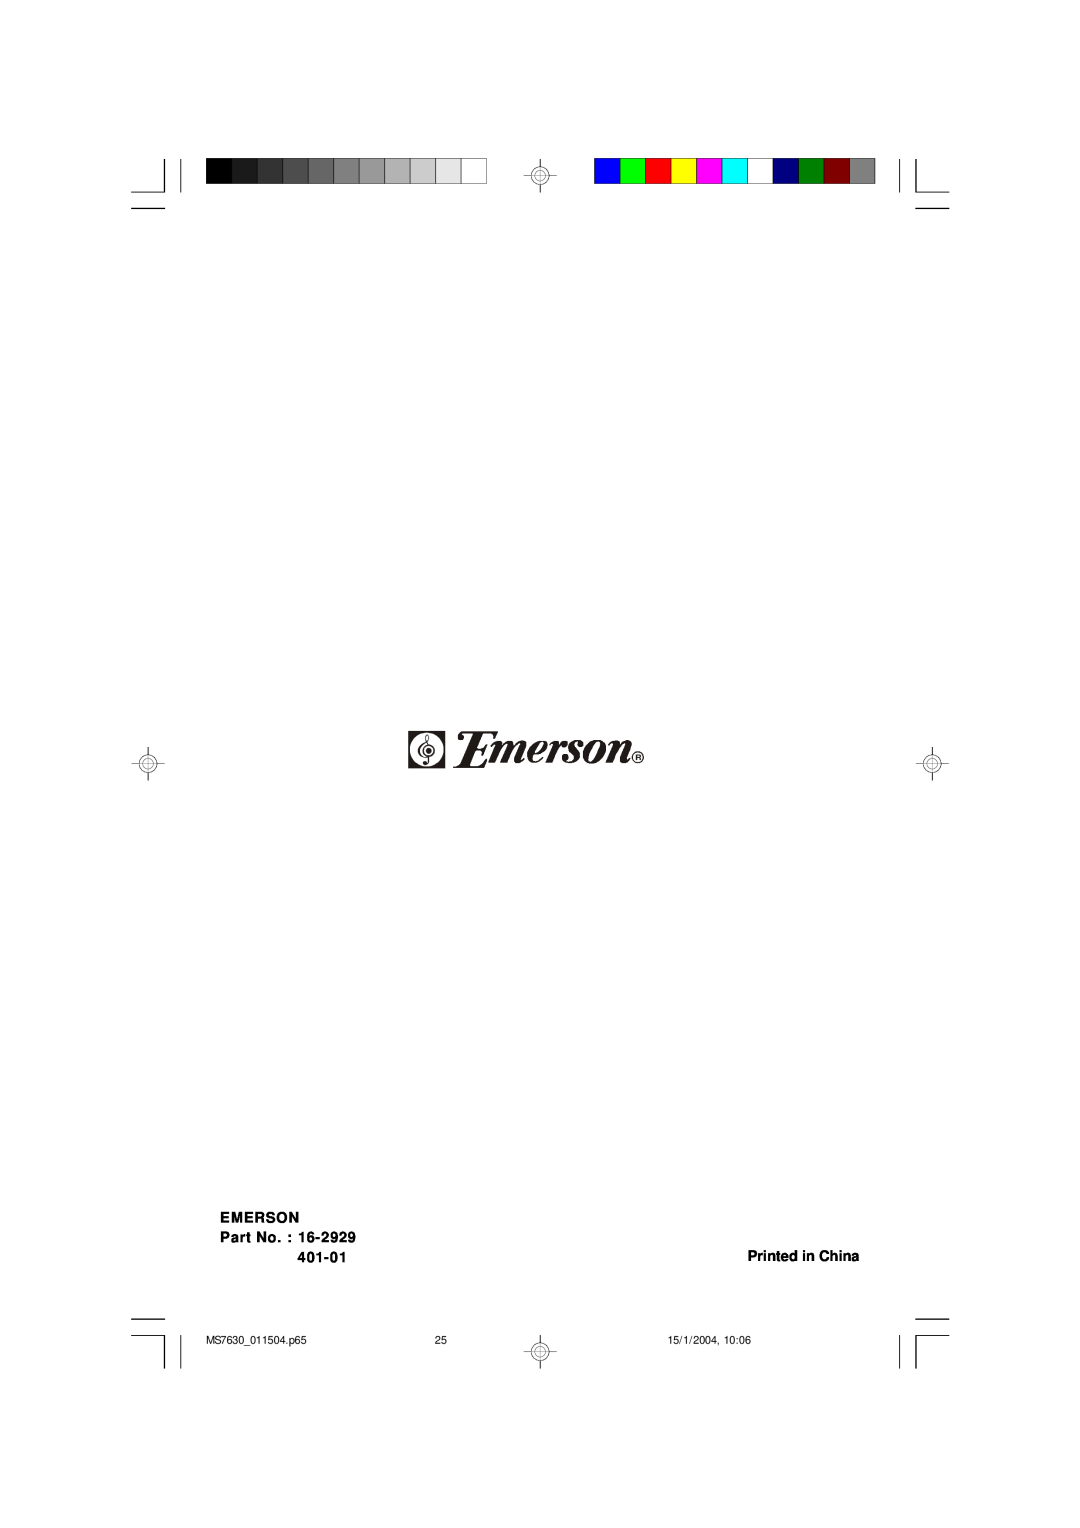 Emerson owner manual Emerson, 401-01, MS7630 011504.p65, 15/1/2004 